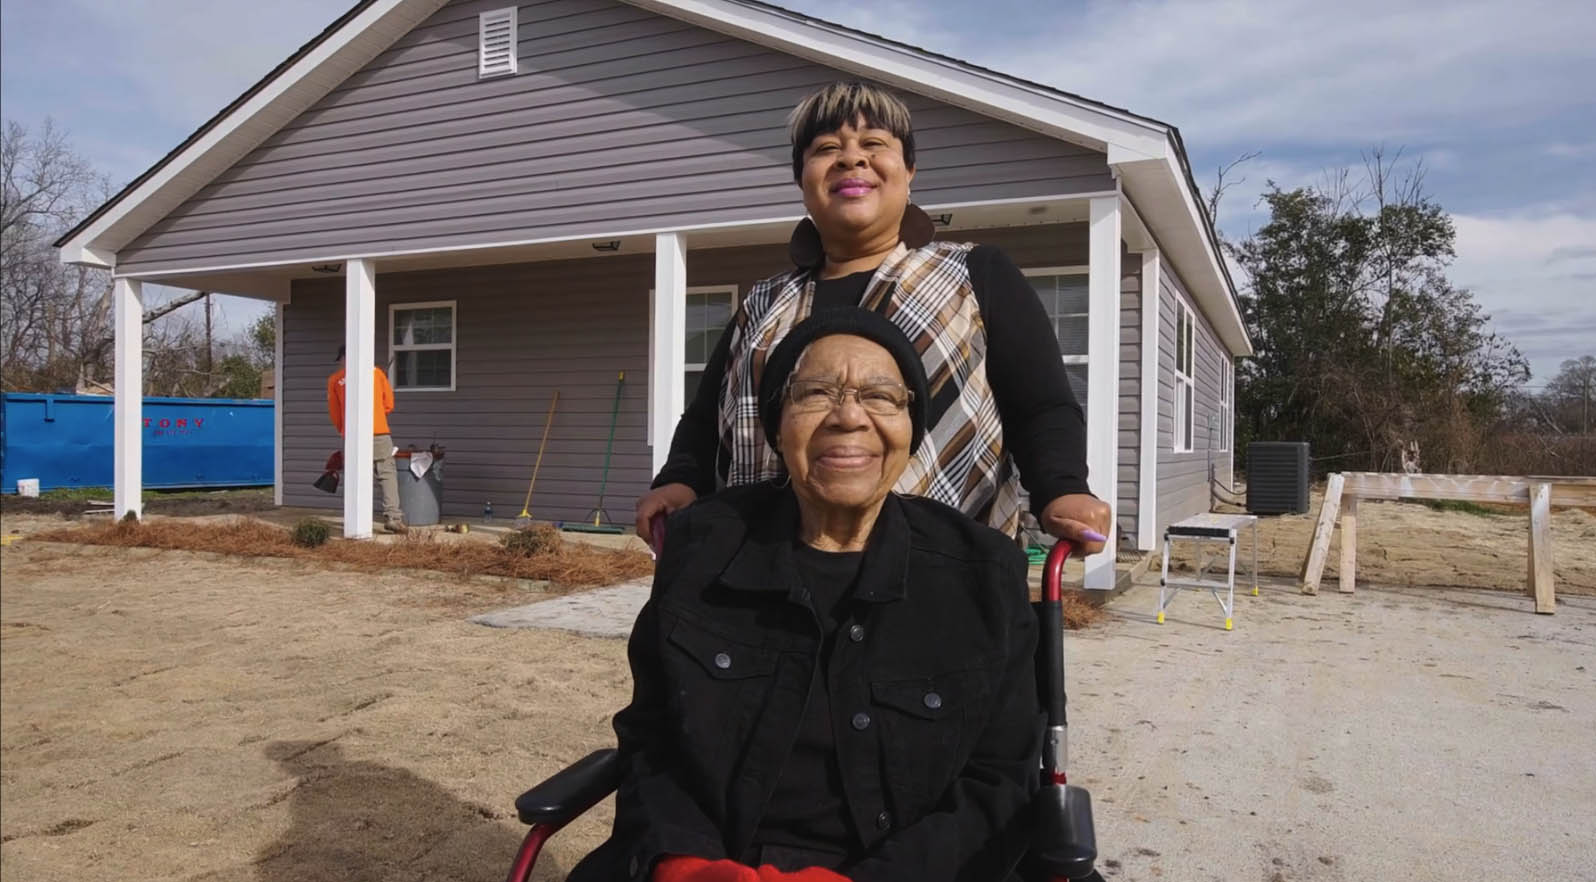 New Homes Dedicated in Alabama